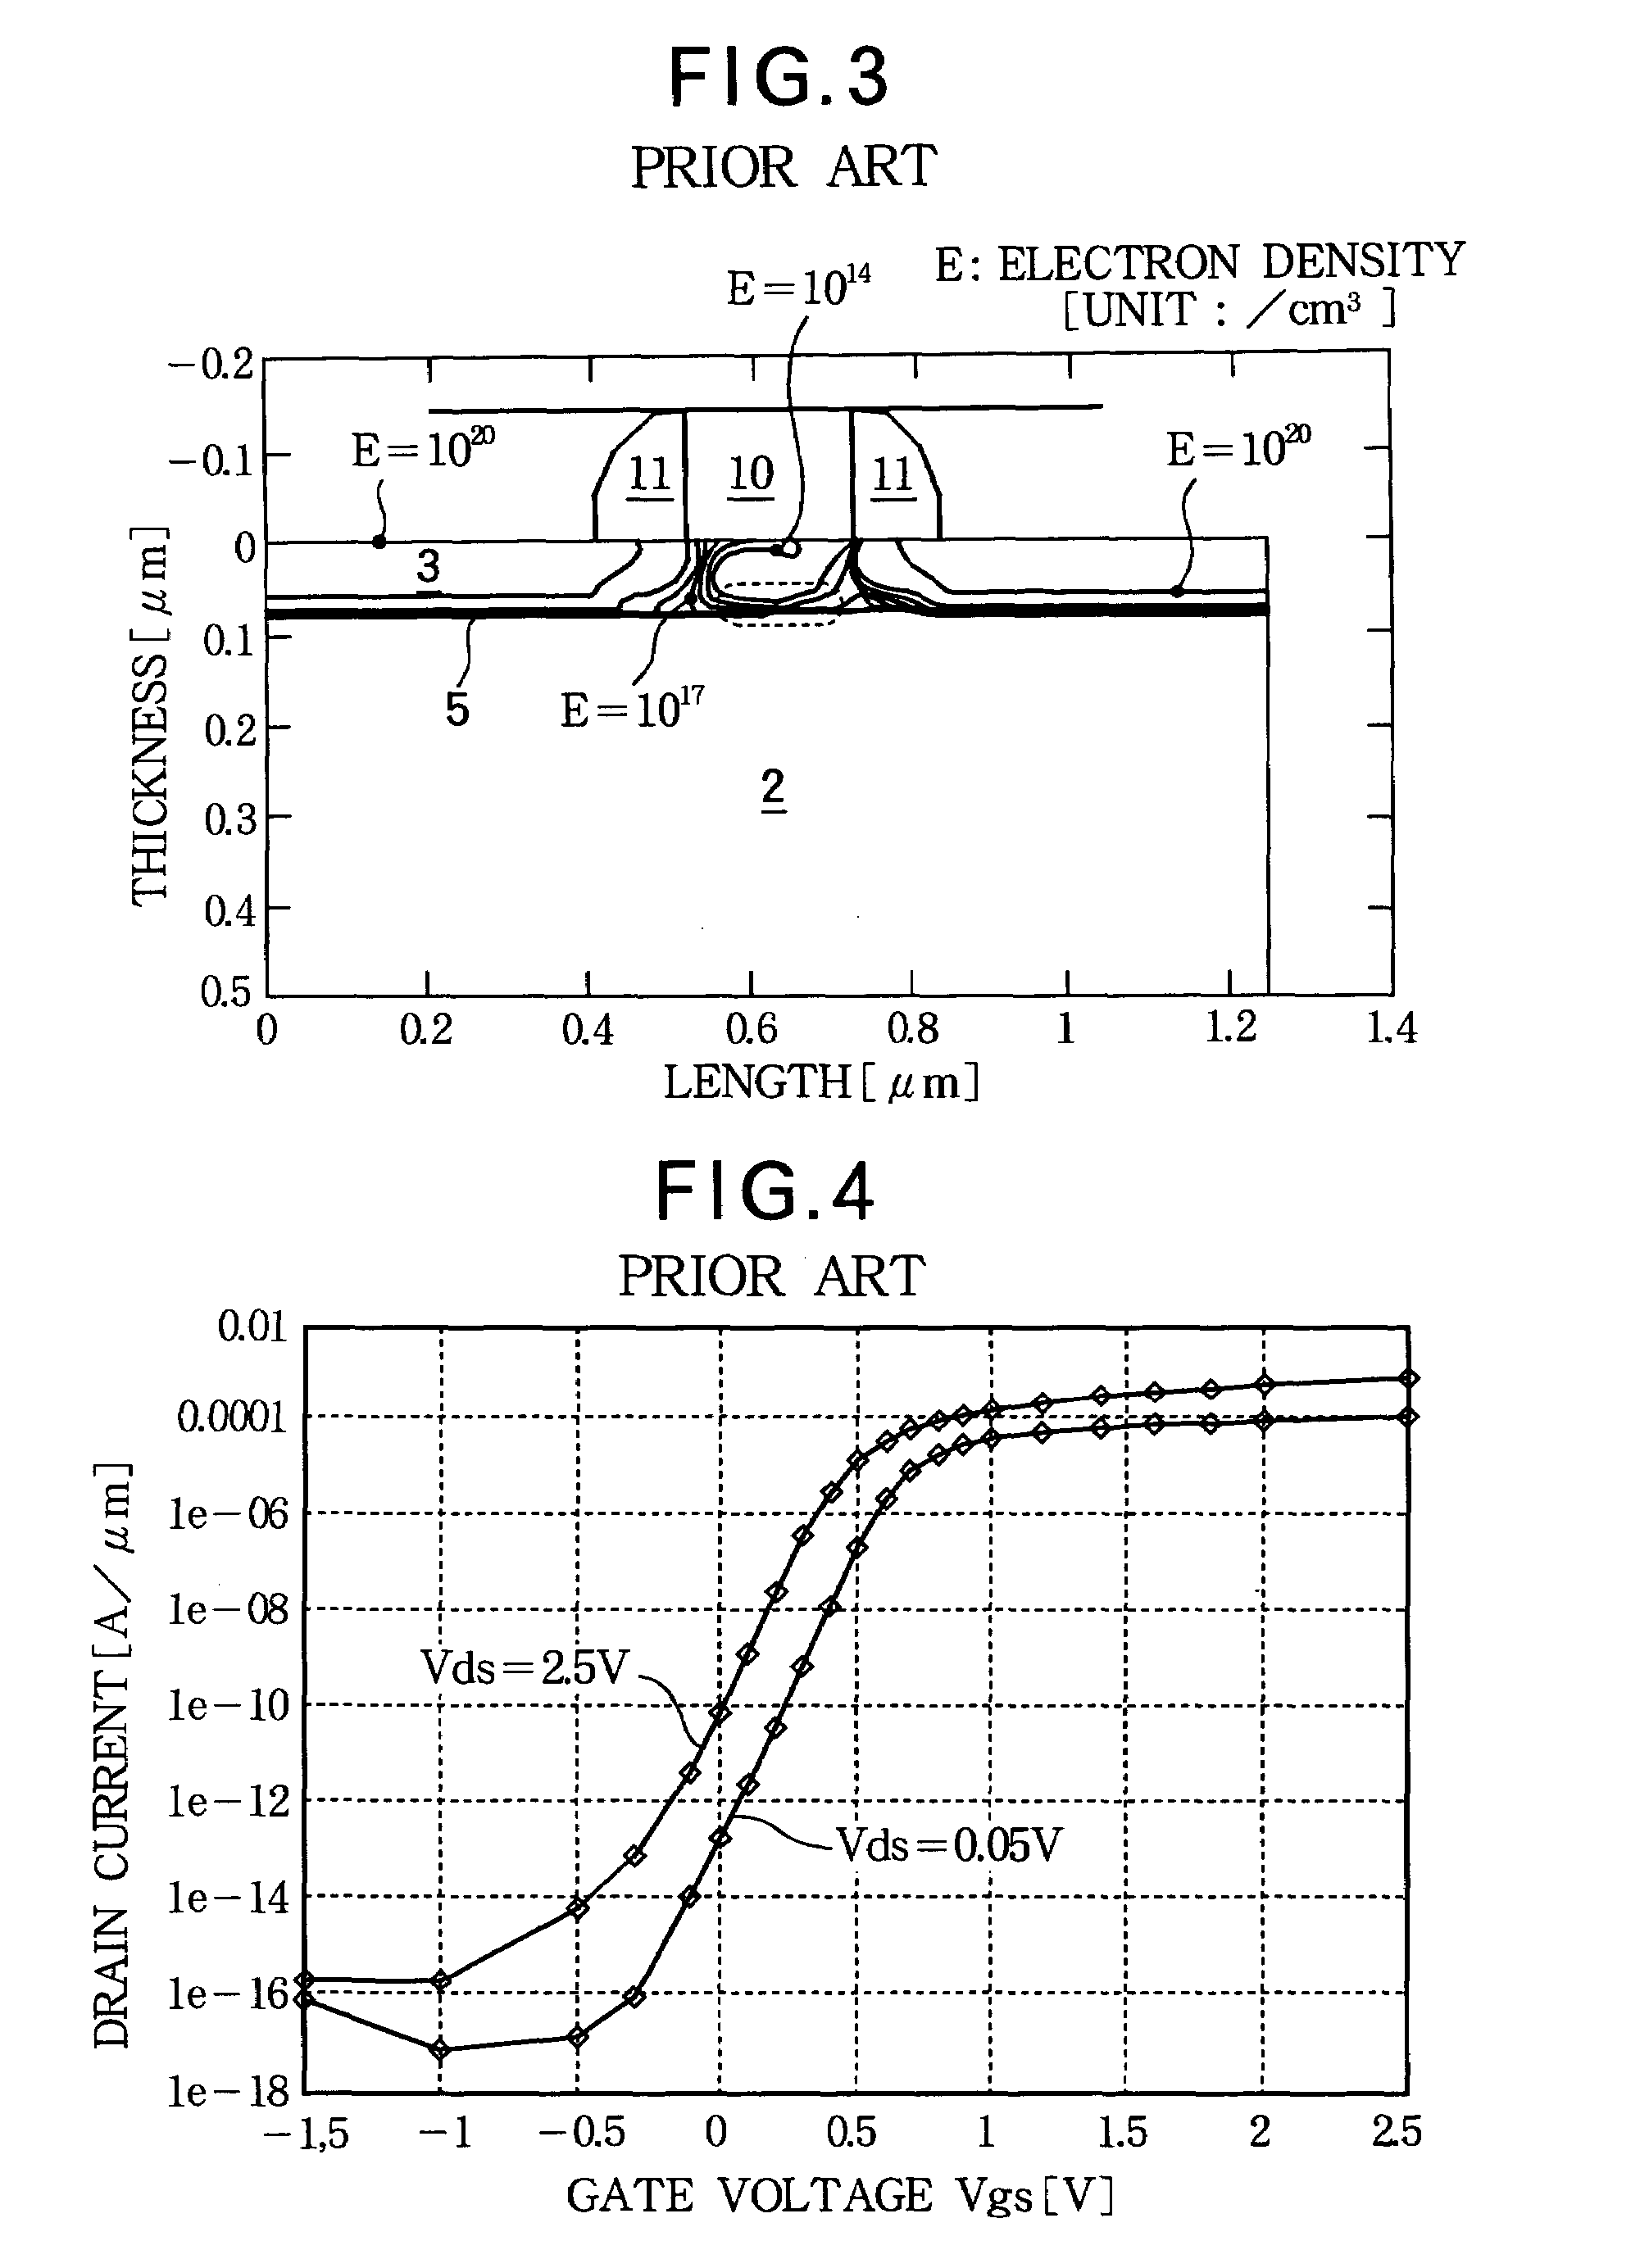 Silicon-on-sapphire semiconductor device with shallow lightly-doped drain